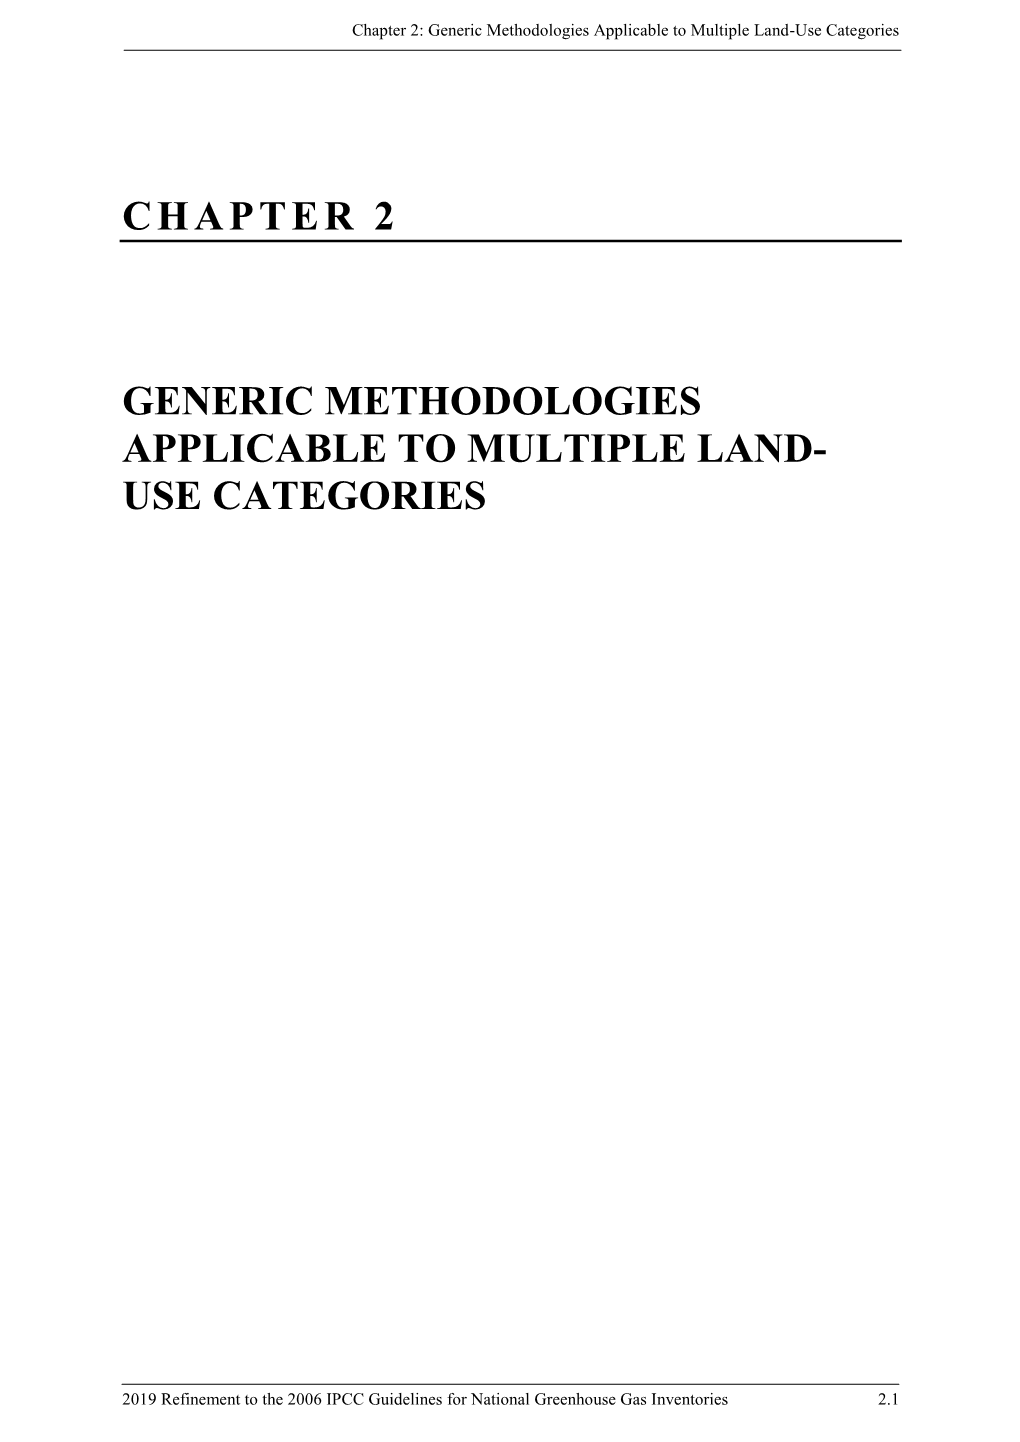 Generic Methodologies Applicable to Multiple Land-Use Categories